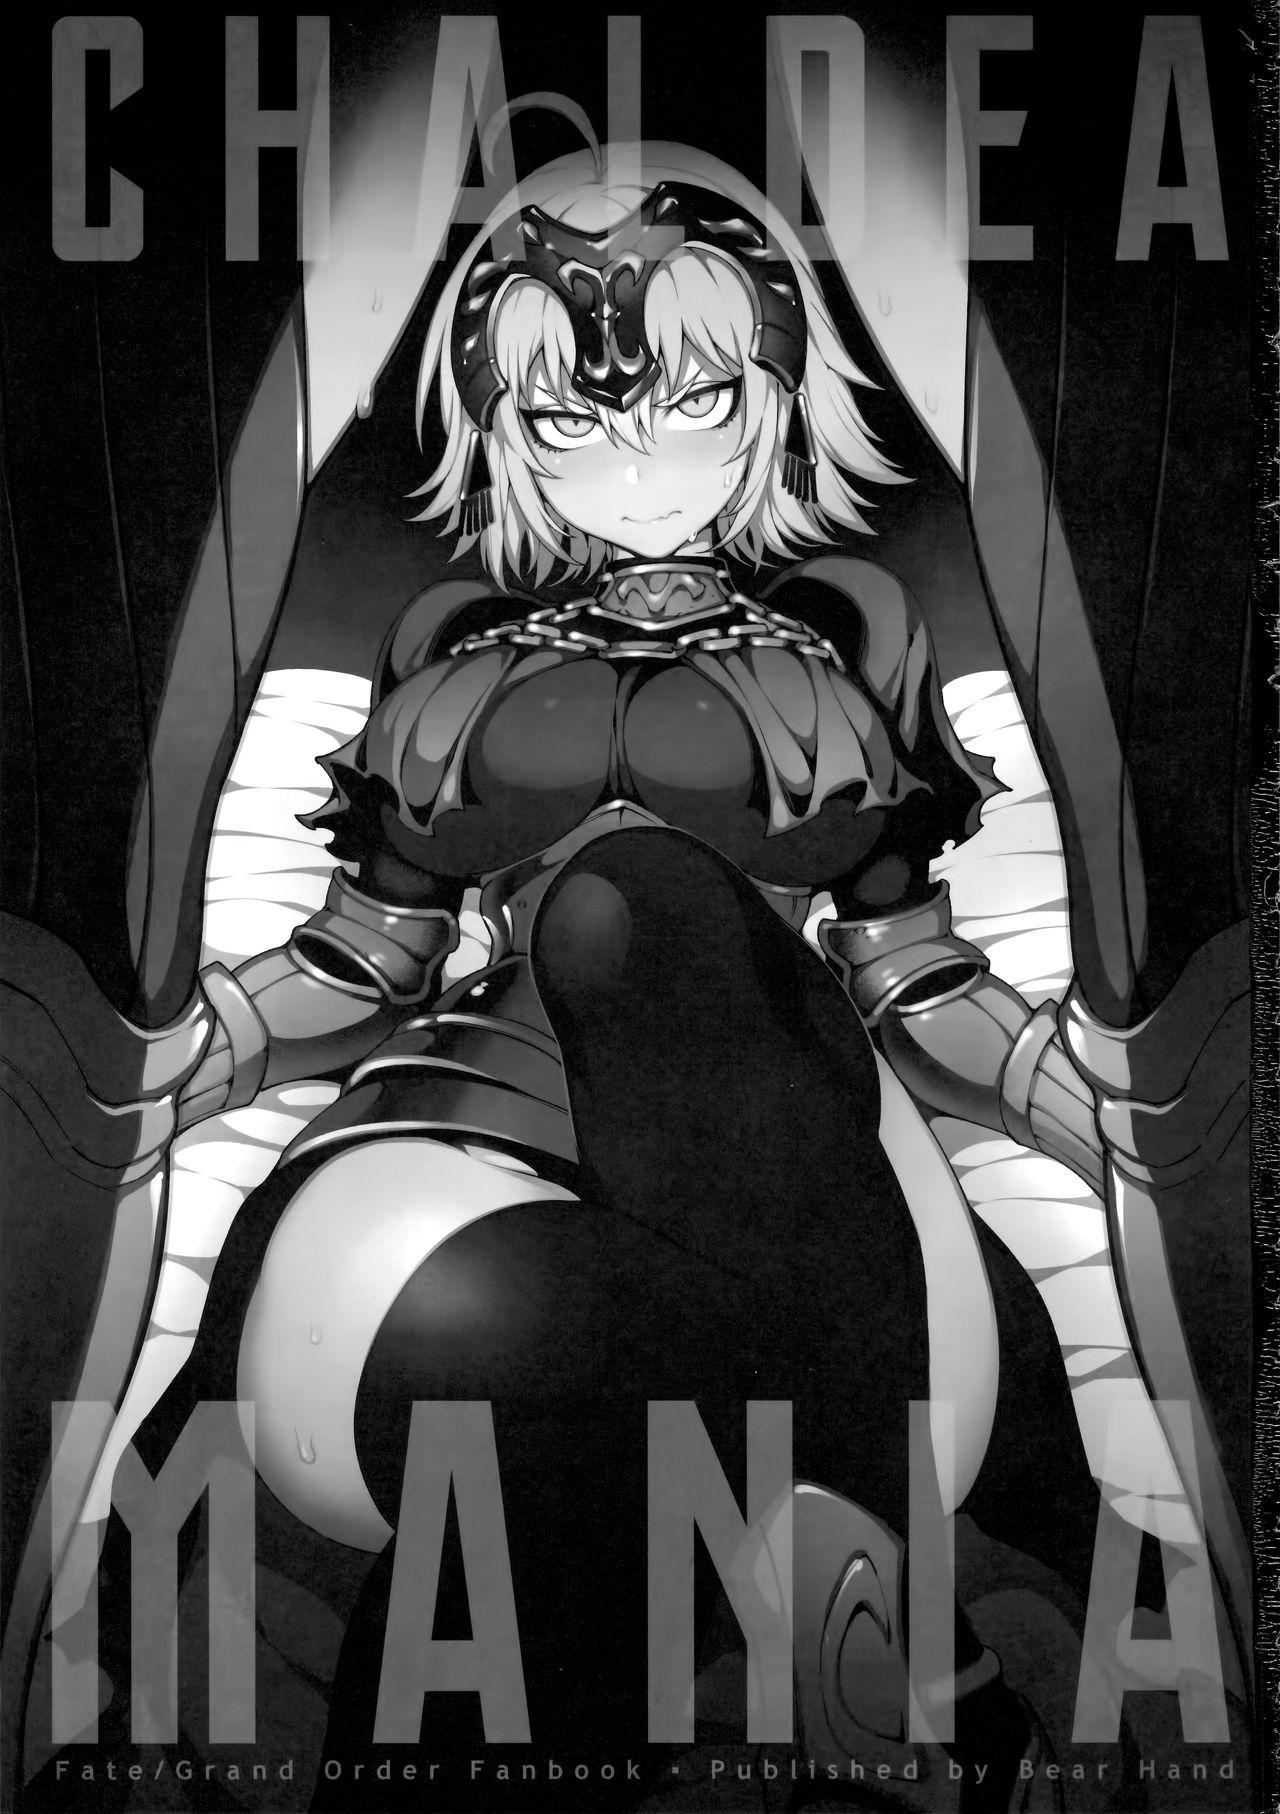 Scandal CHALDEA MANIA - Jeanne Alter - Fate grand order Footjob - Page 2